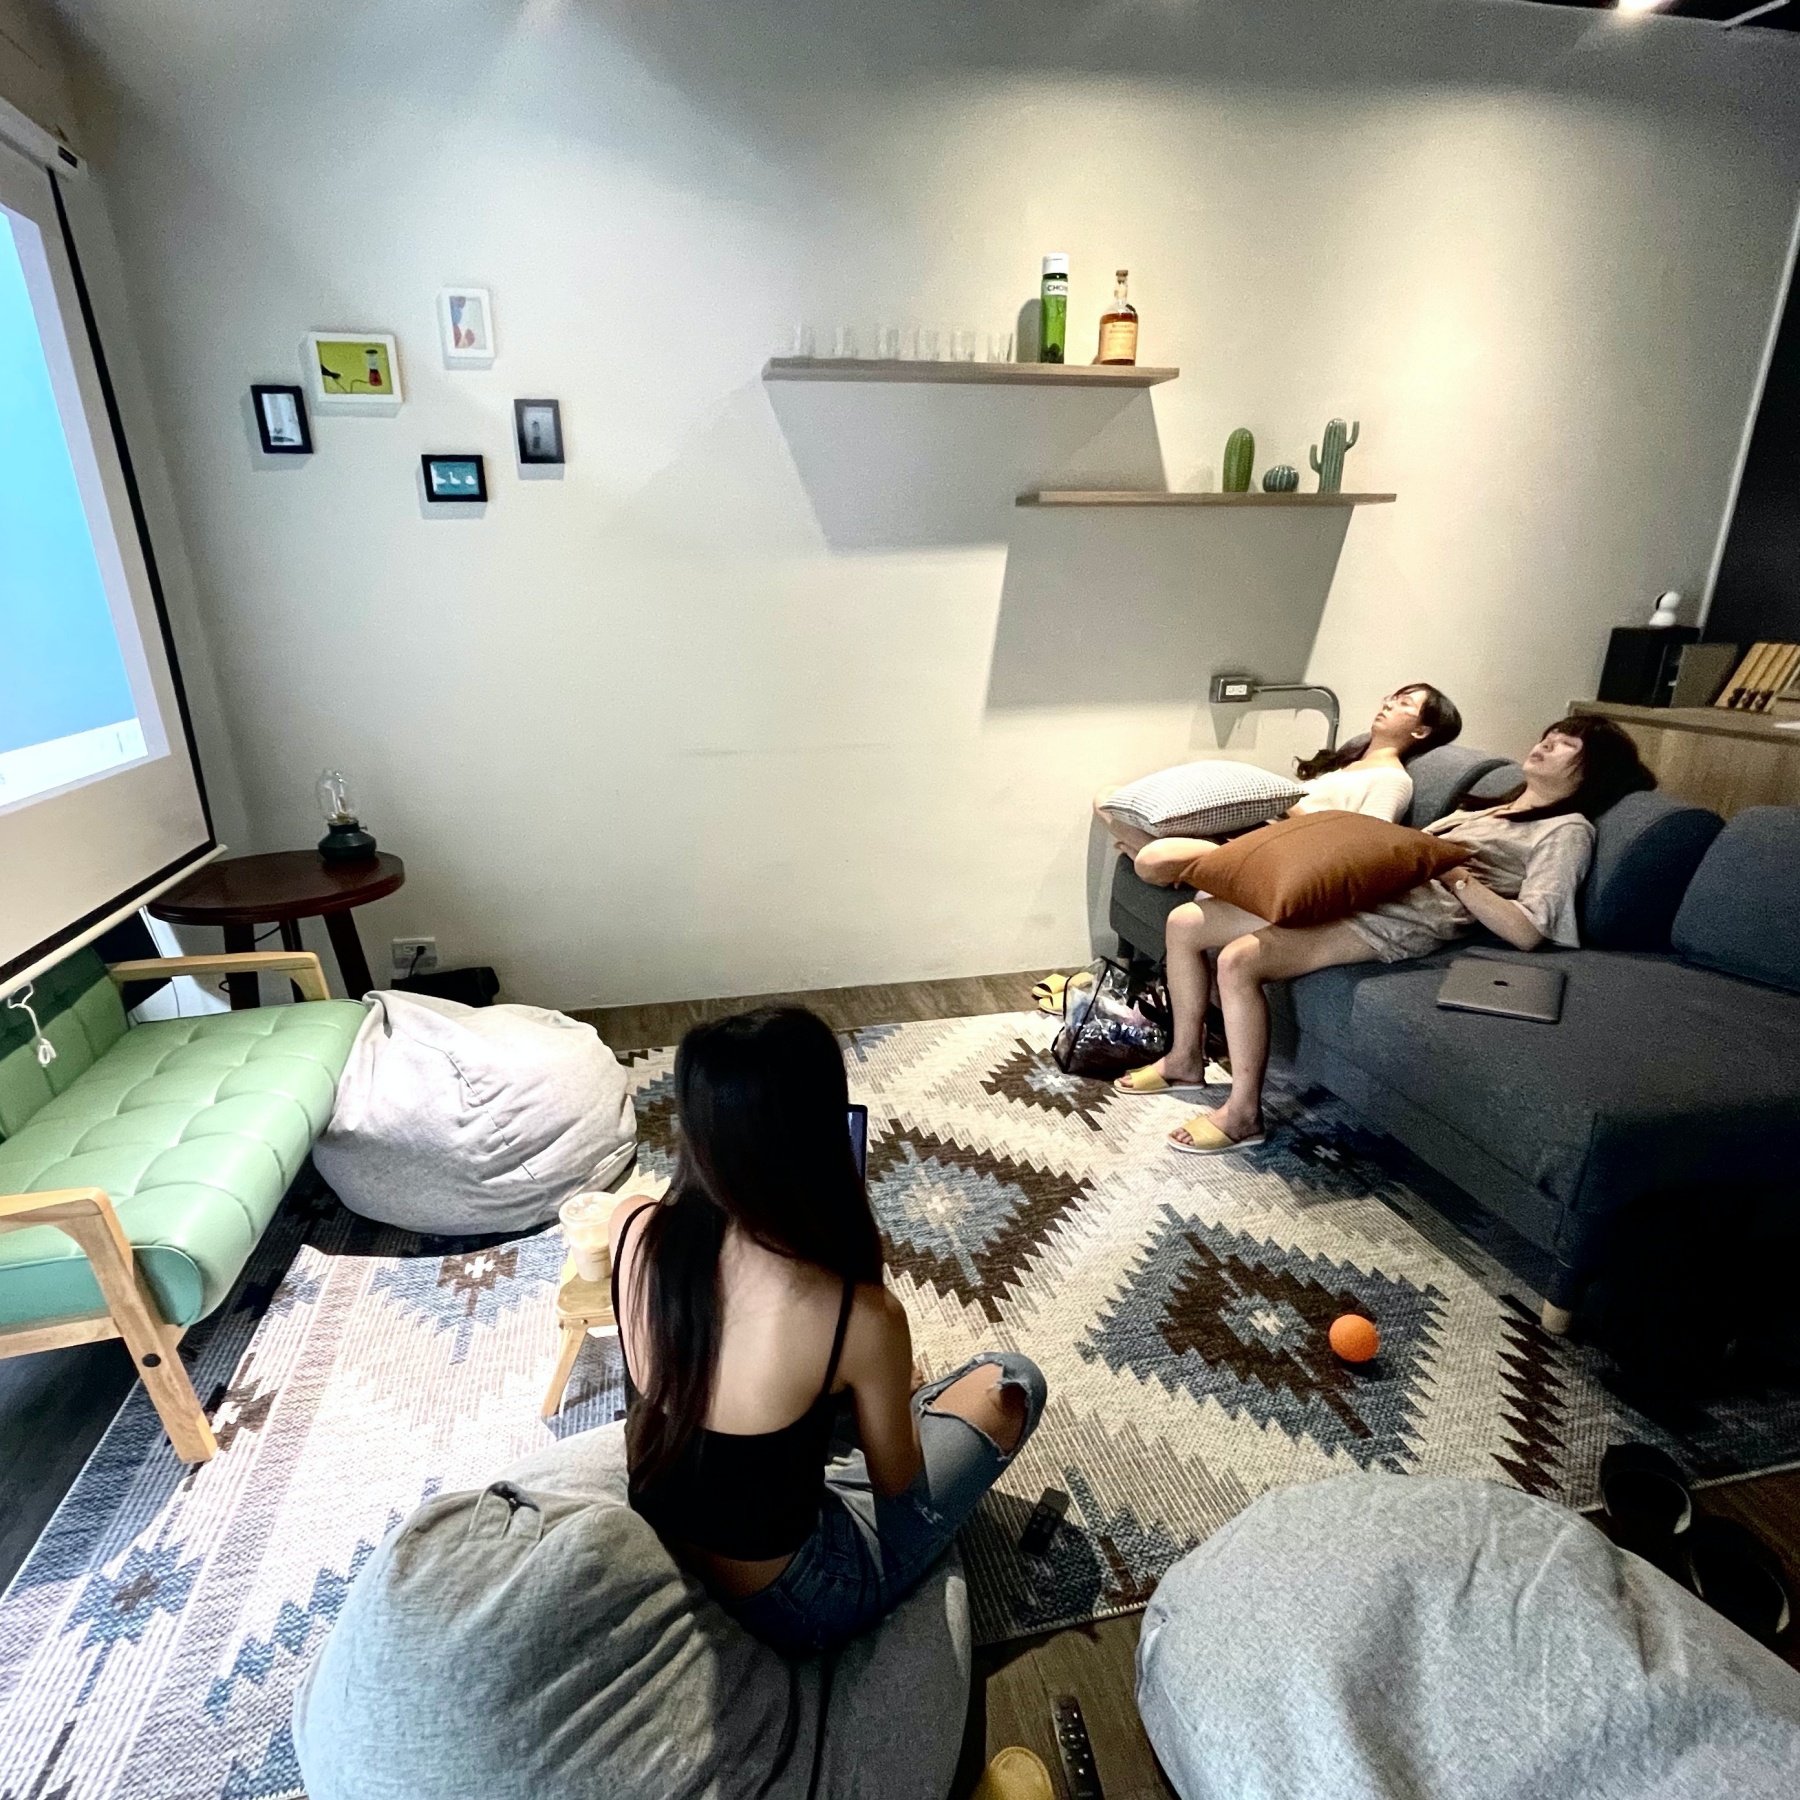 [Heyhey Dive Review] Super Chill Taichung Self Diving Studio, group training and diving trips make free diving a daily routine 20